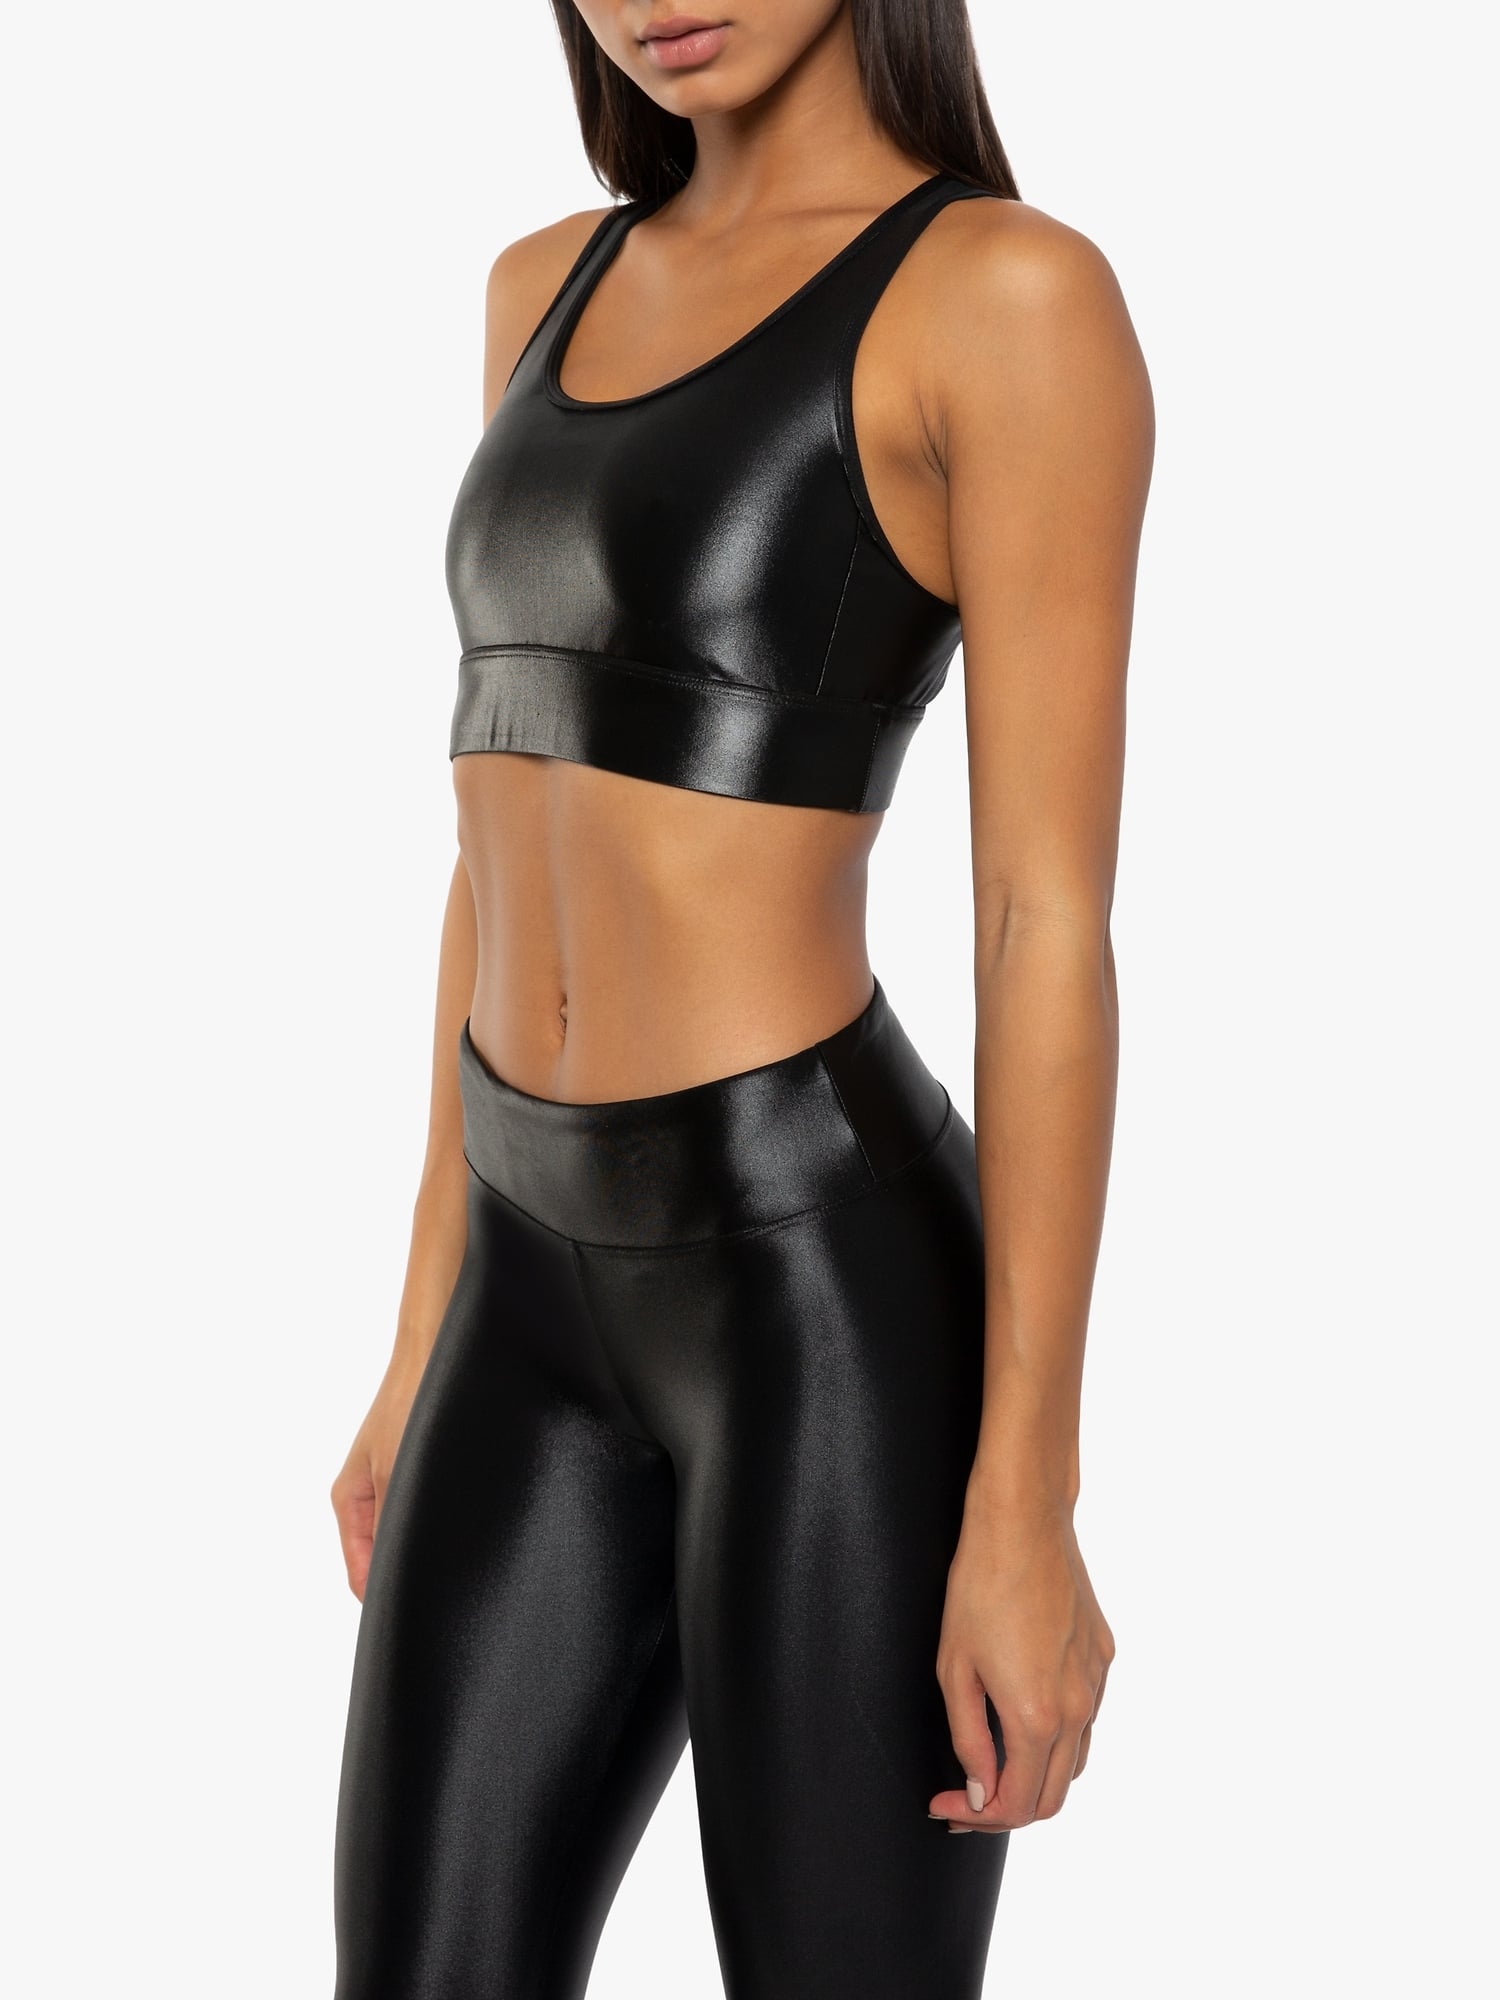 Koral Bermuda Infinity Sports Bra, 2 California Brands Created an  Activewear Line That'll Get You Moving This January